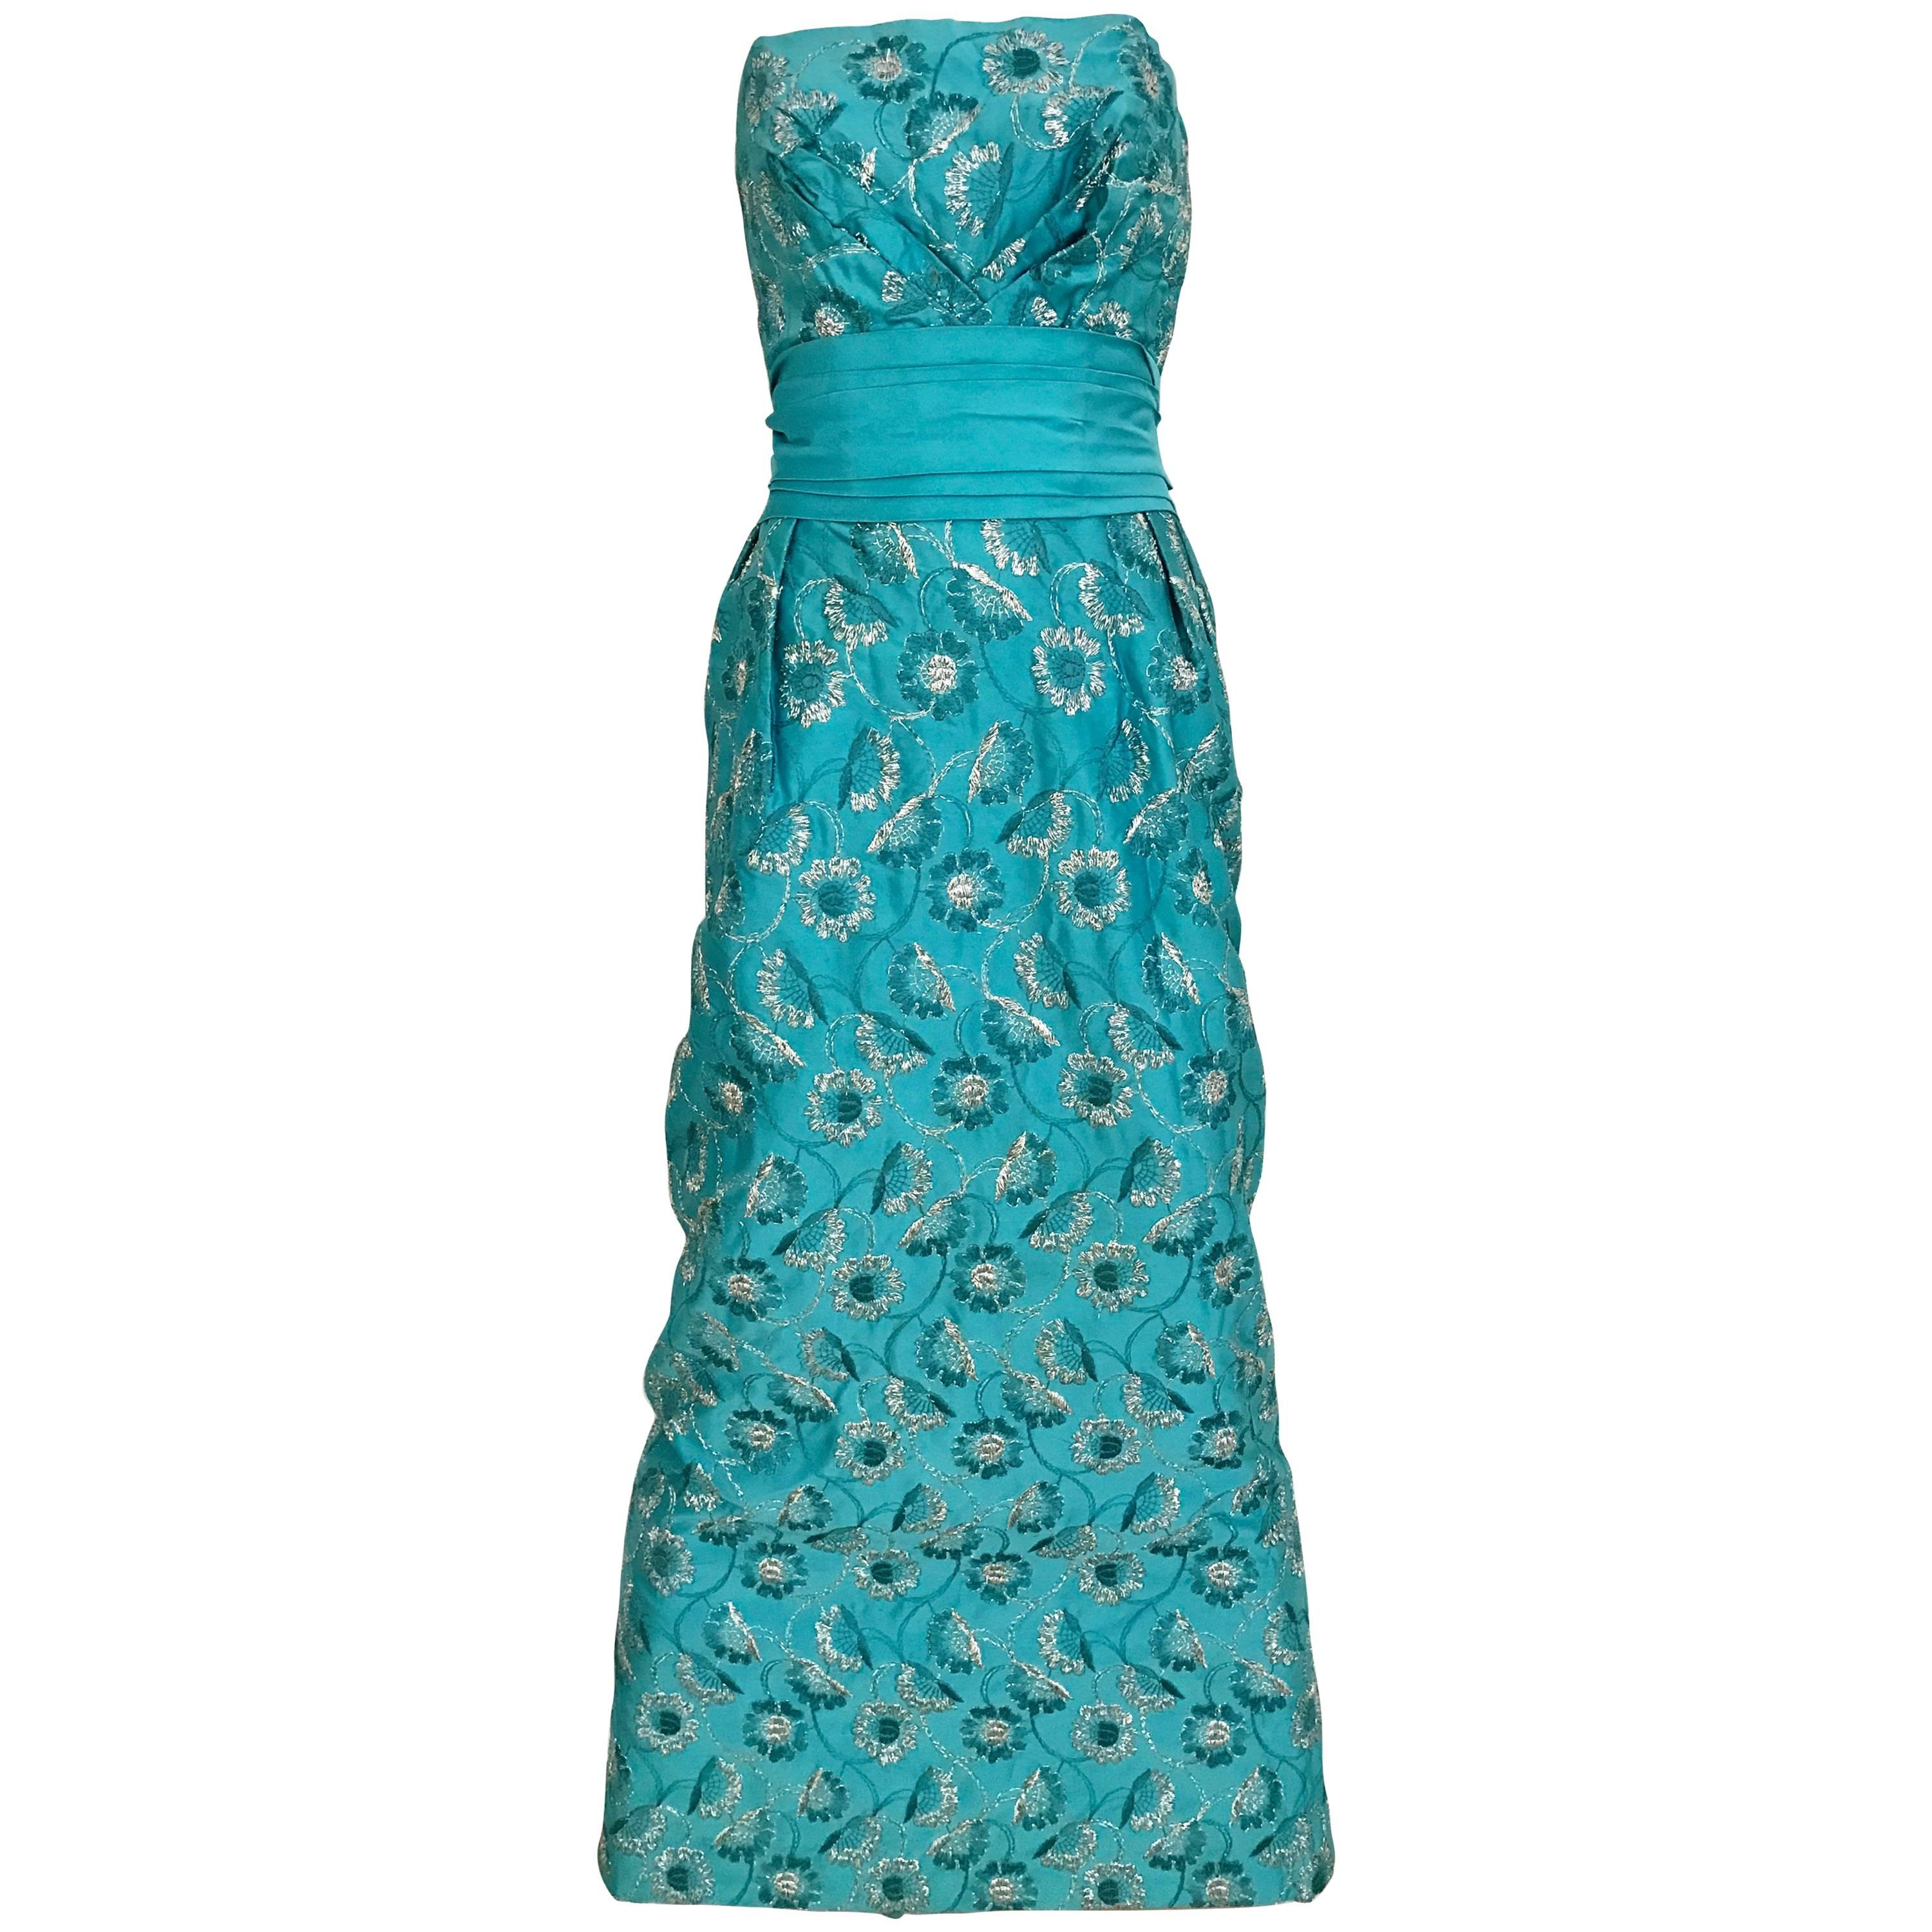 1960s Turquoise Blue Strapless Gown with Silver Floral Embroidery